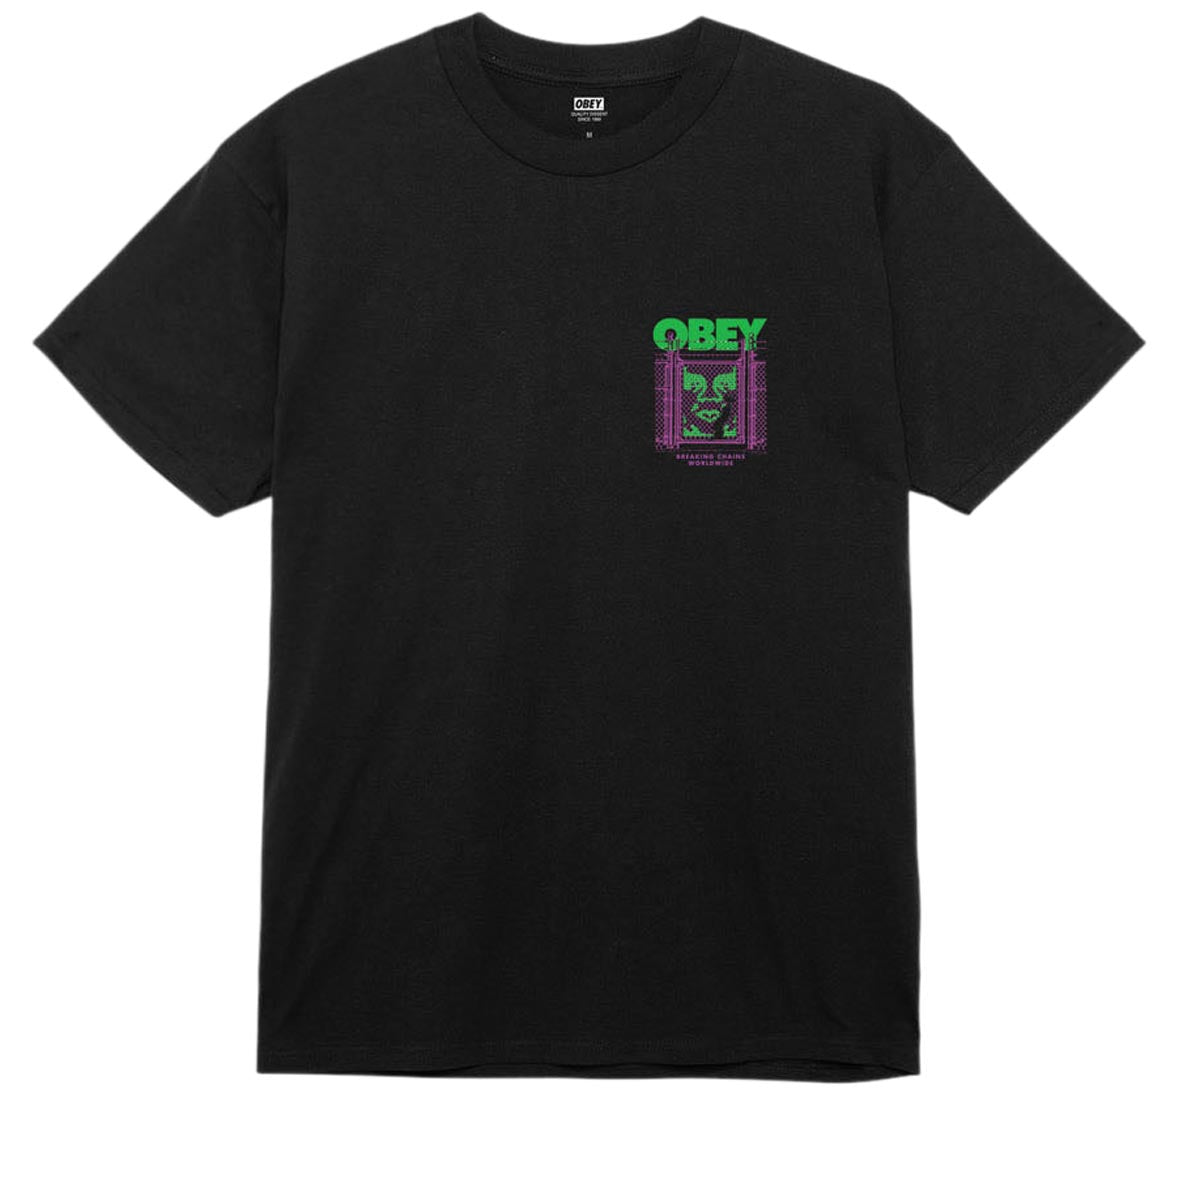 Obey Chain Link Fence Icon T-Shirt - Black image 2